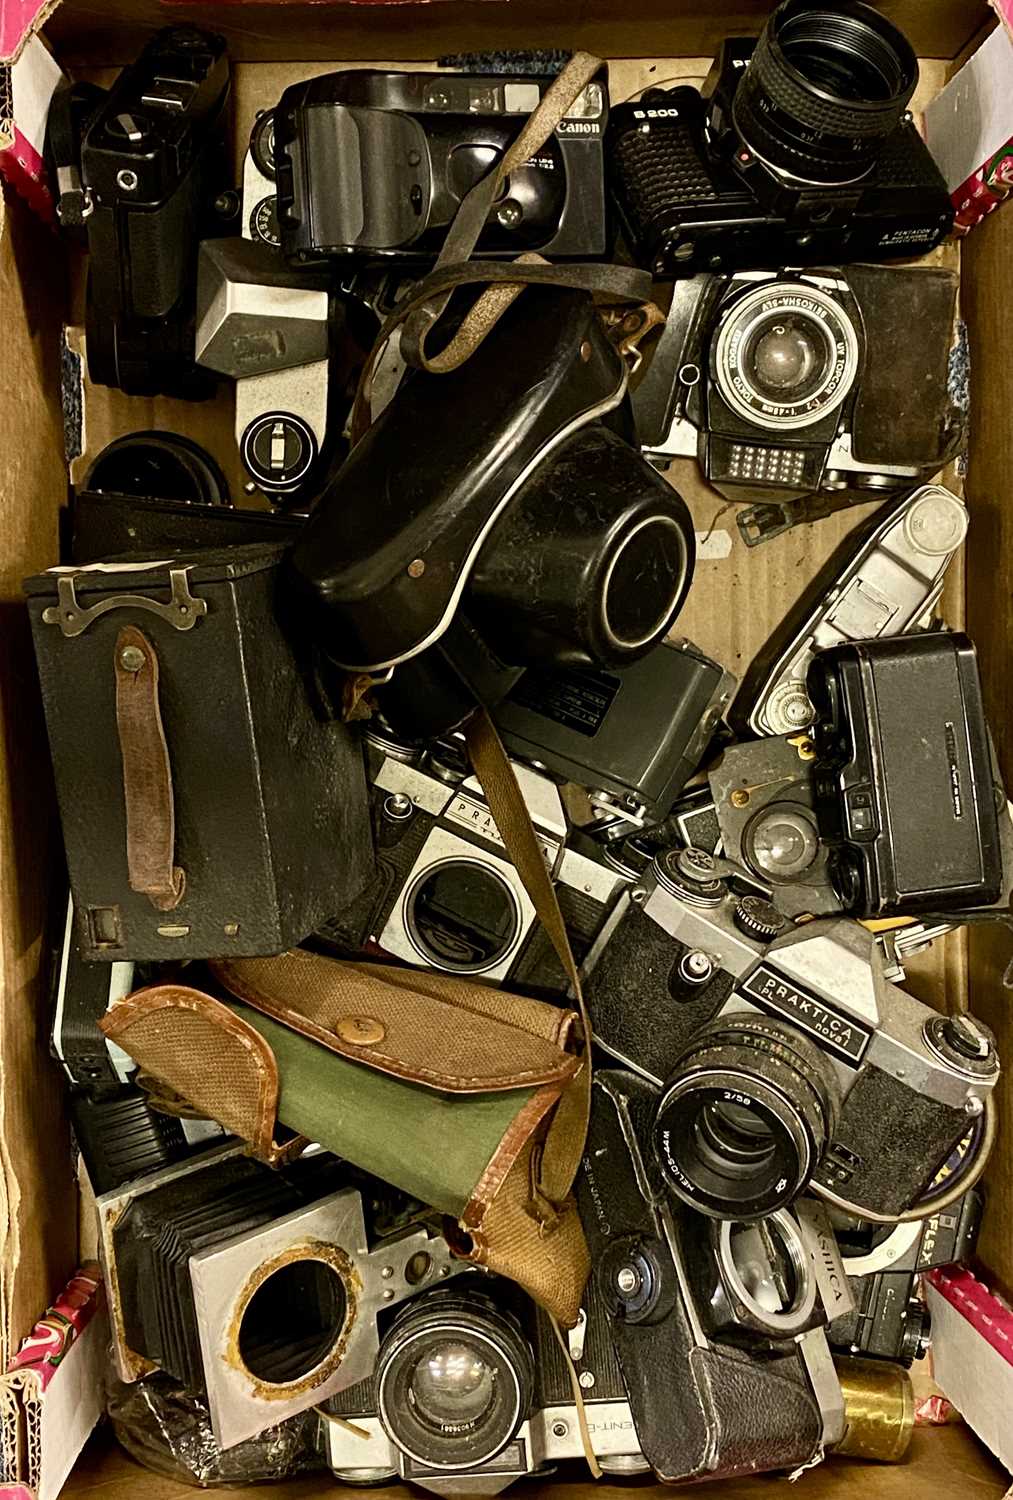 LARGE QUANTITY OF CAMERAS & ACCESSORIES, including bodies, lenses, flashes etc. contained within - Image 5 of 5